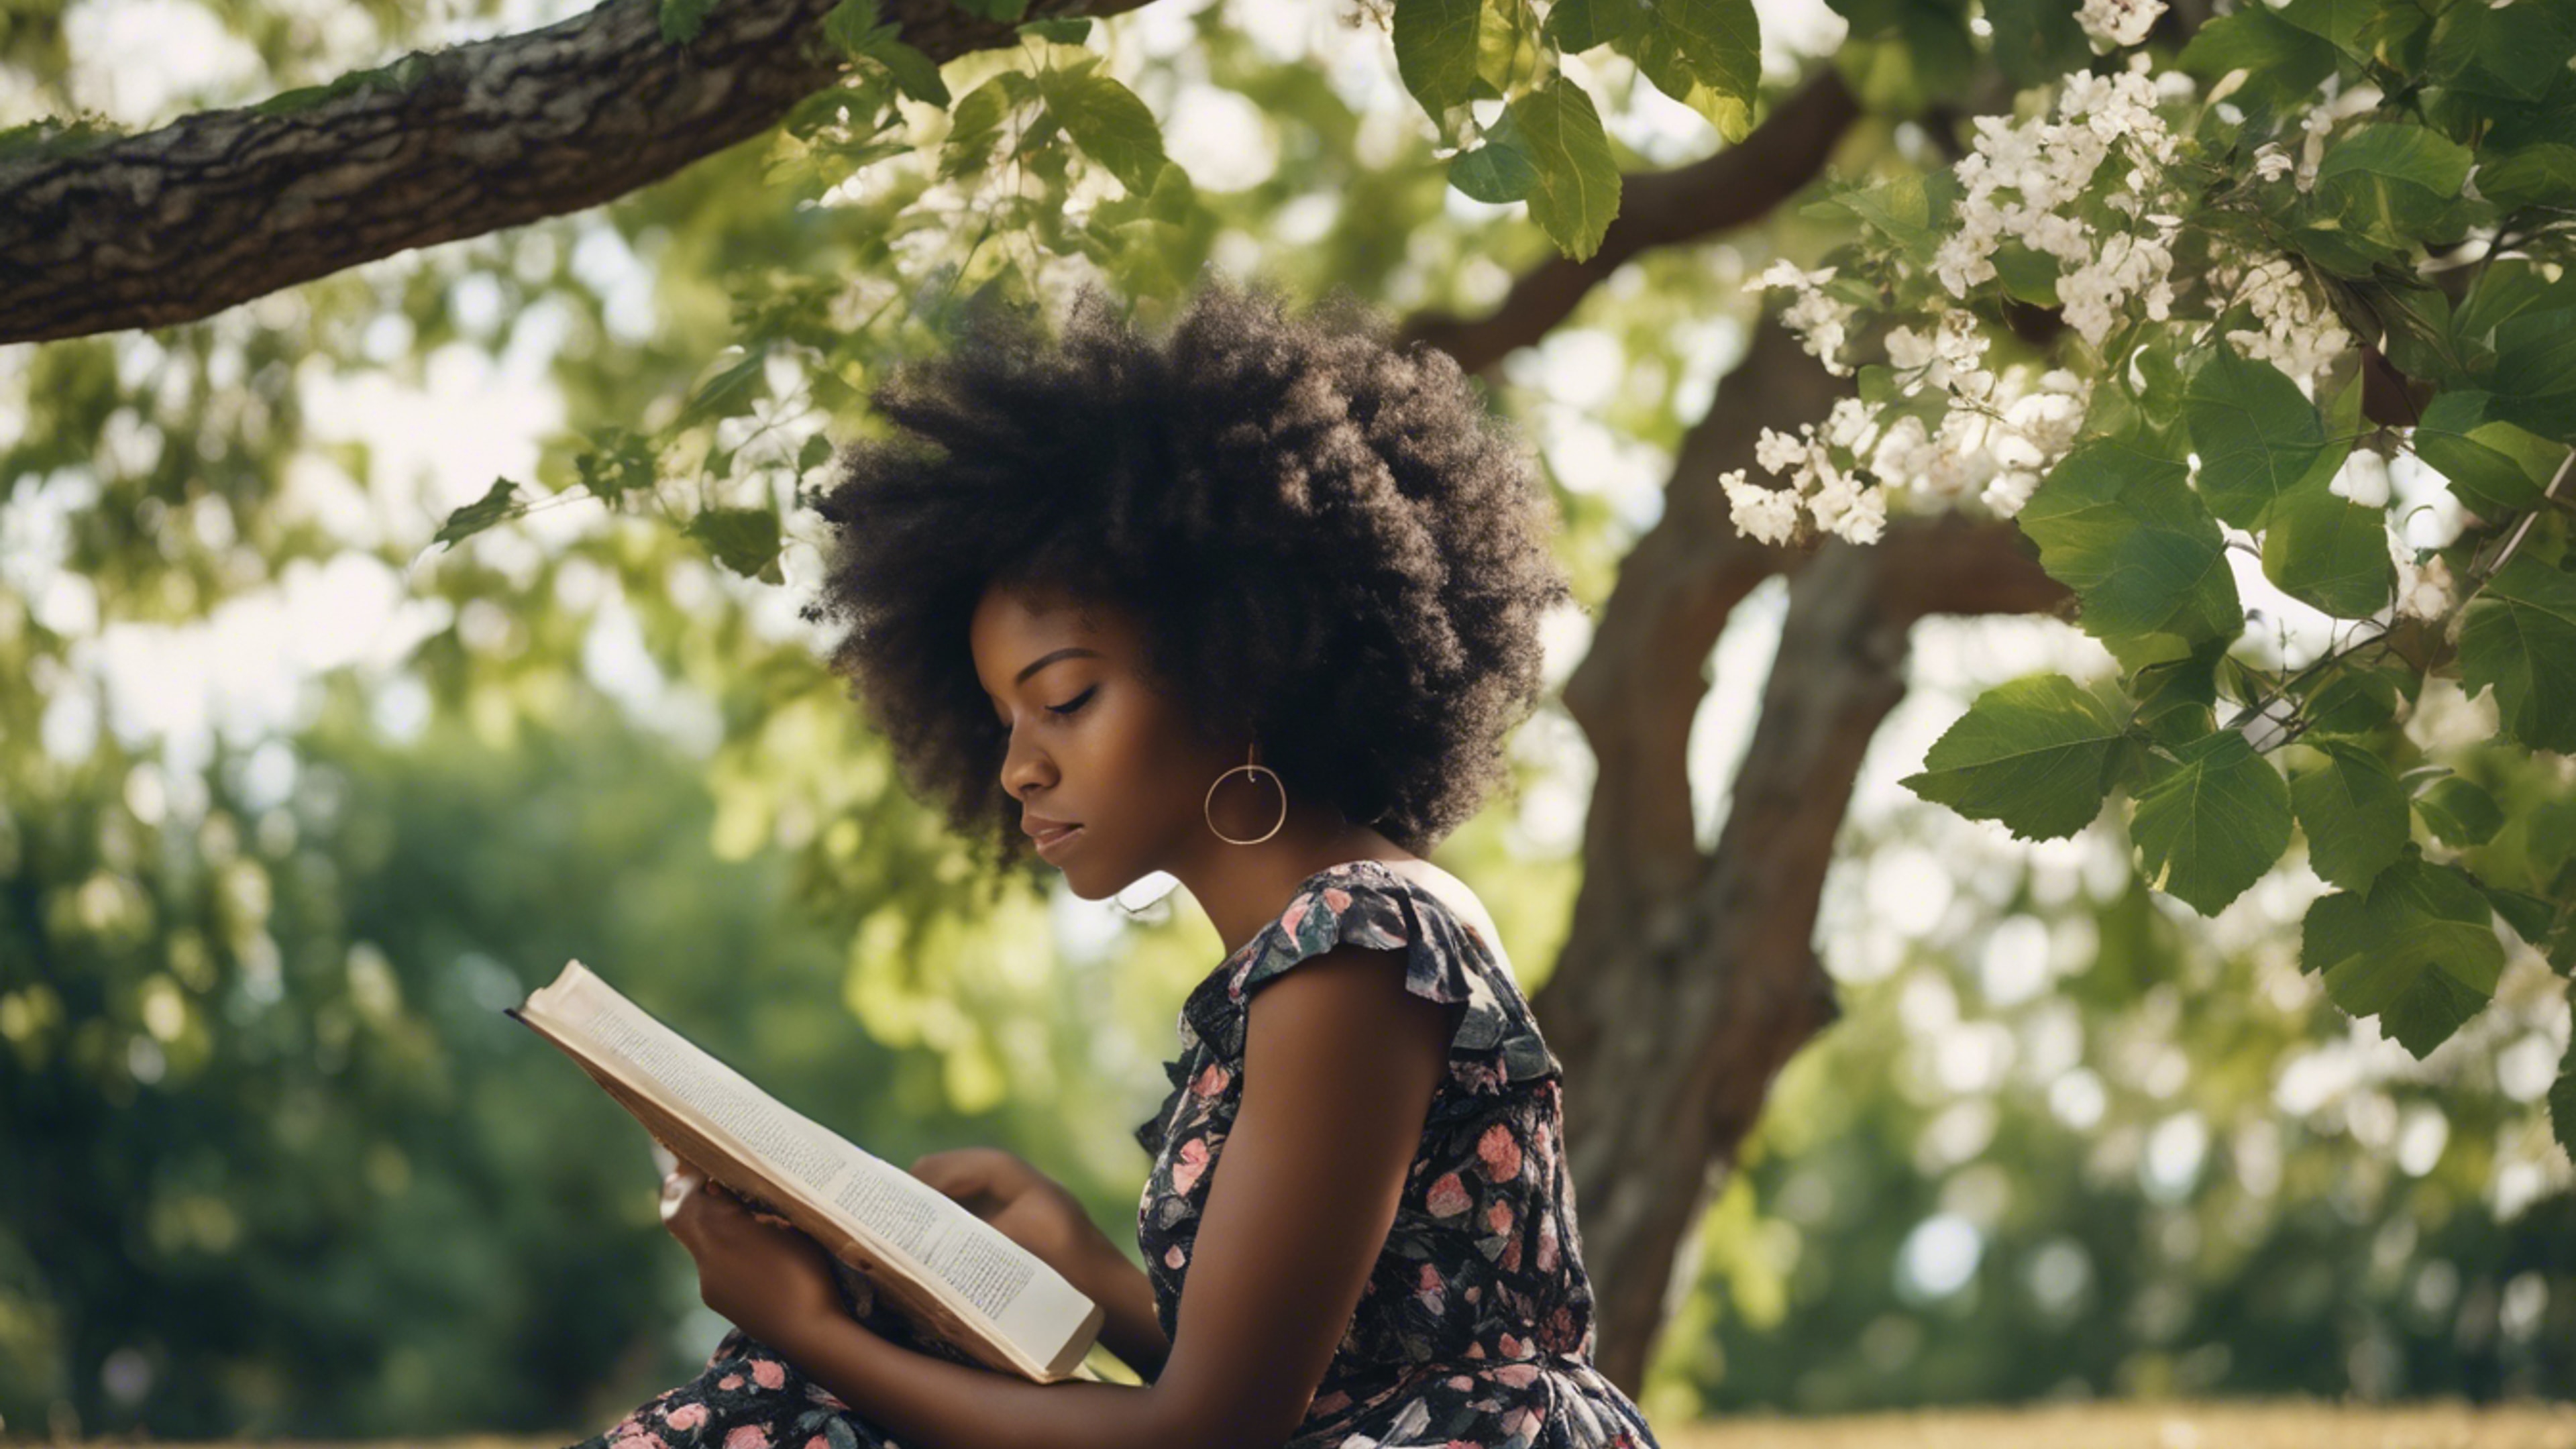 A black girl wearing a floral summer dress, reading a book under a leafy tree. Тапет[43e6f52508fc47b3bd35]